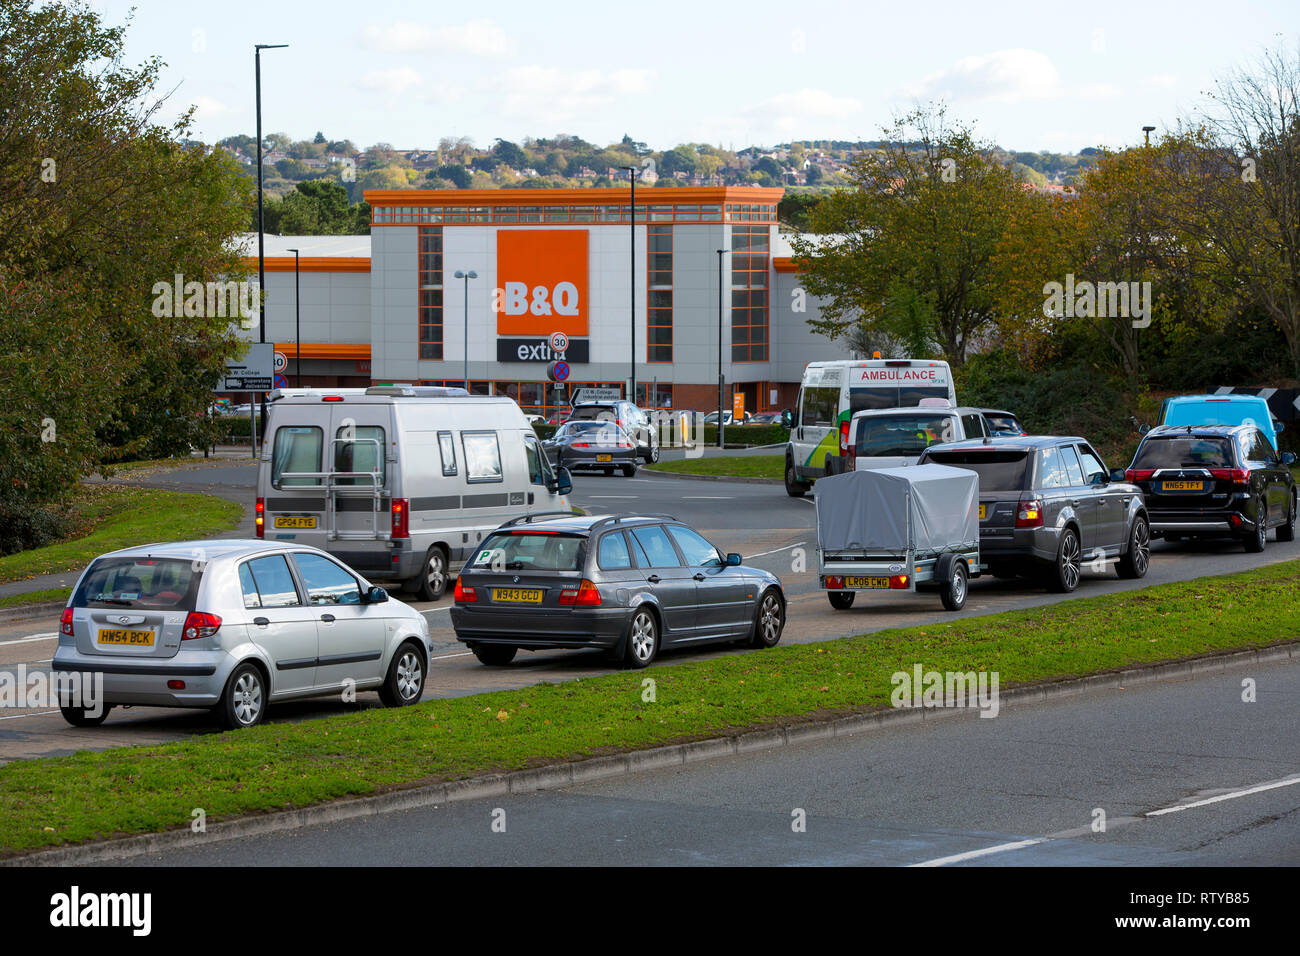 B&Q, St Mary's Roundabout, Duel carriageway, Newport, Isle of Wight, England, UK, Stock Photo